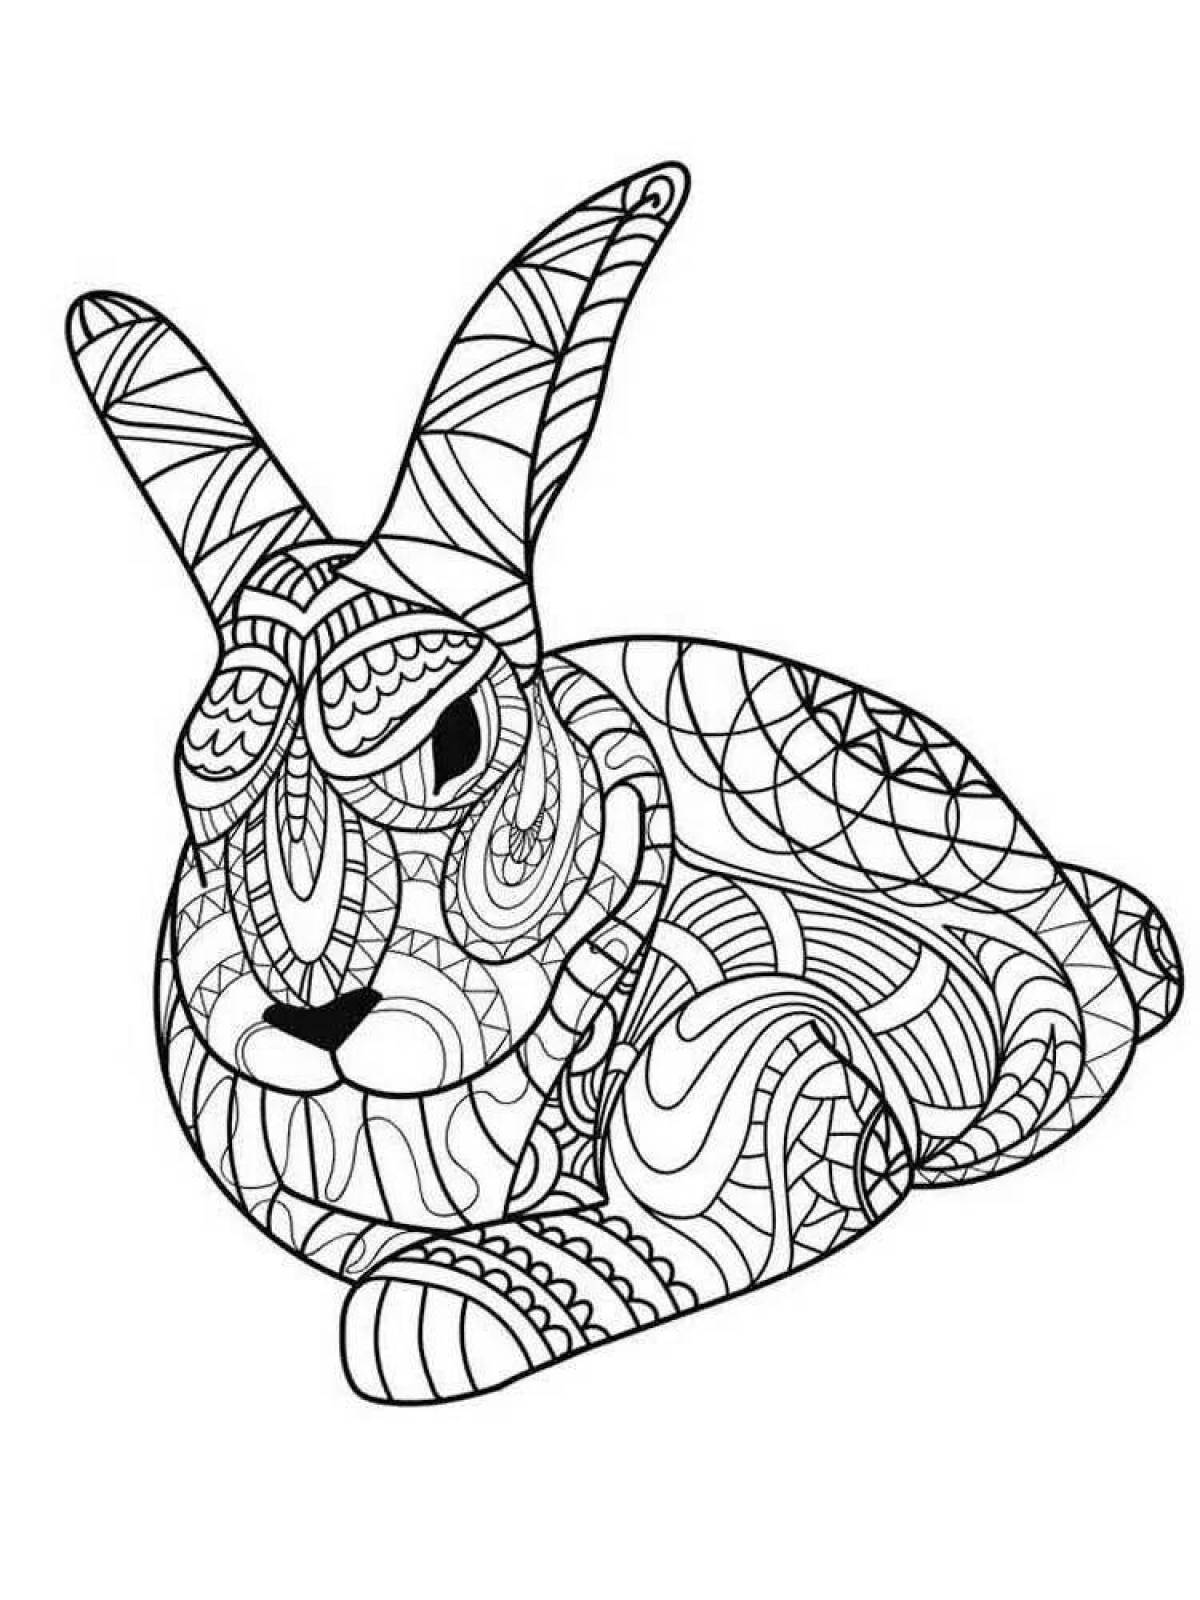 Coloring book cheerful anti-stress hare